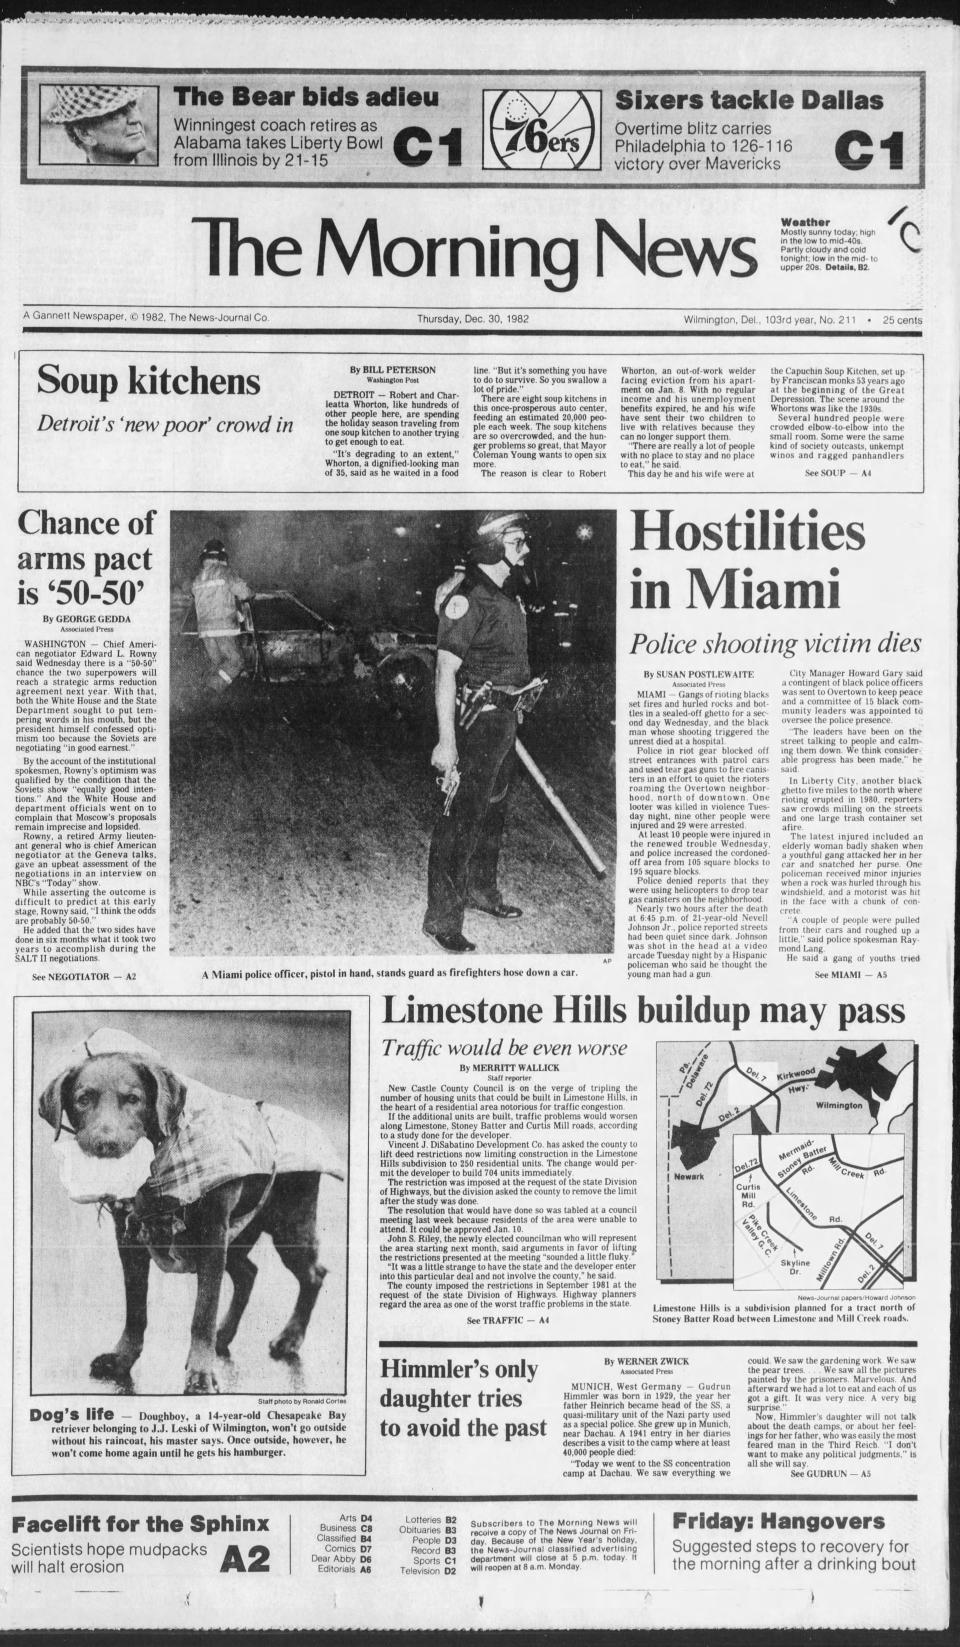 Front page of The Morning News, Dec. 30, 1982